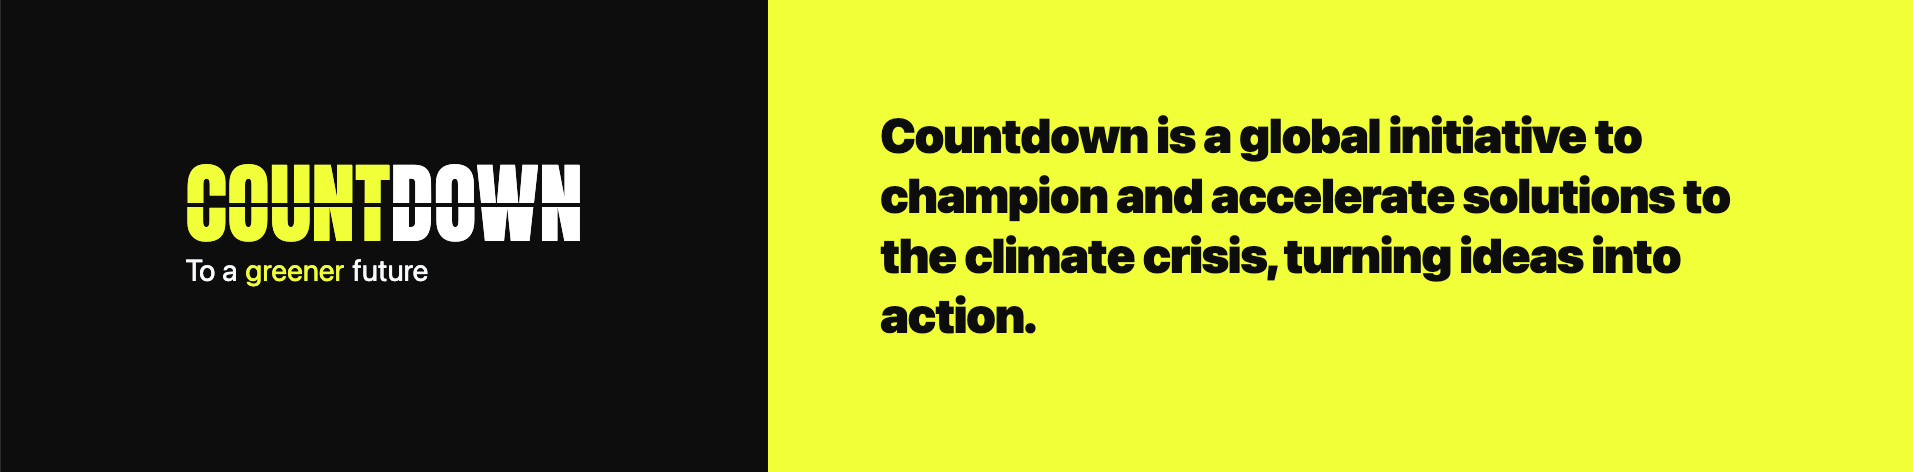 TED Countdown Graphic 2020